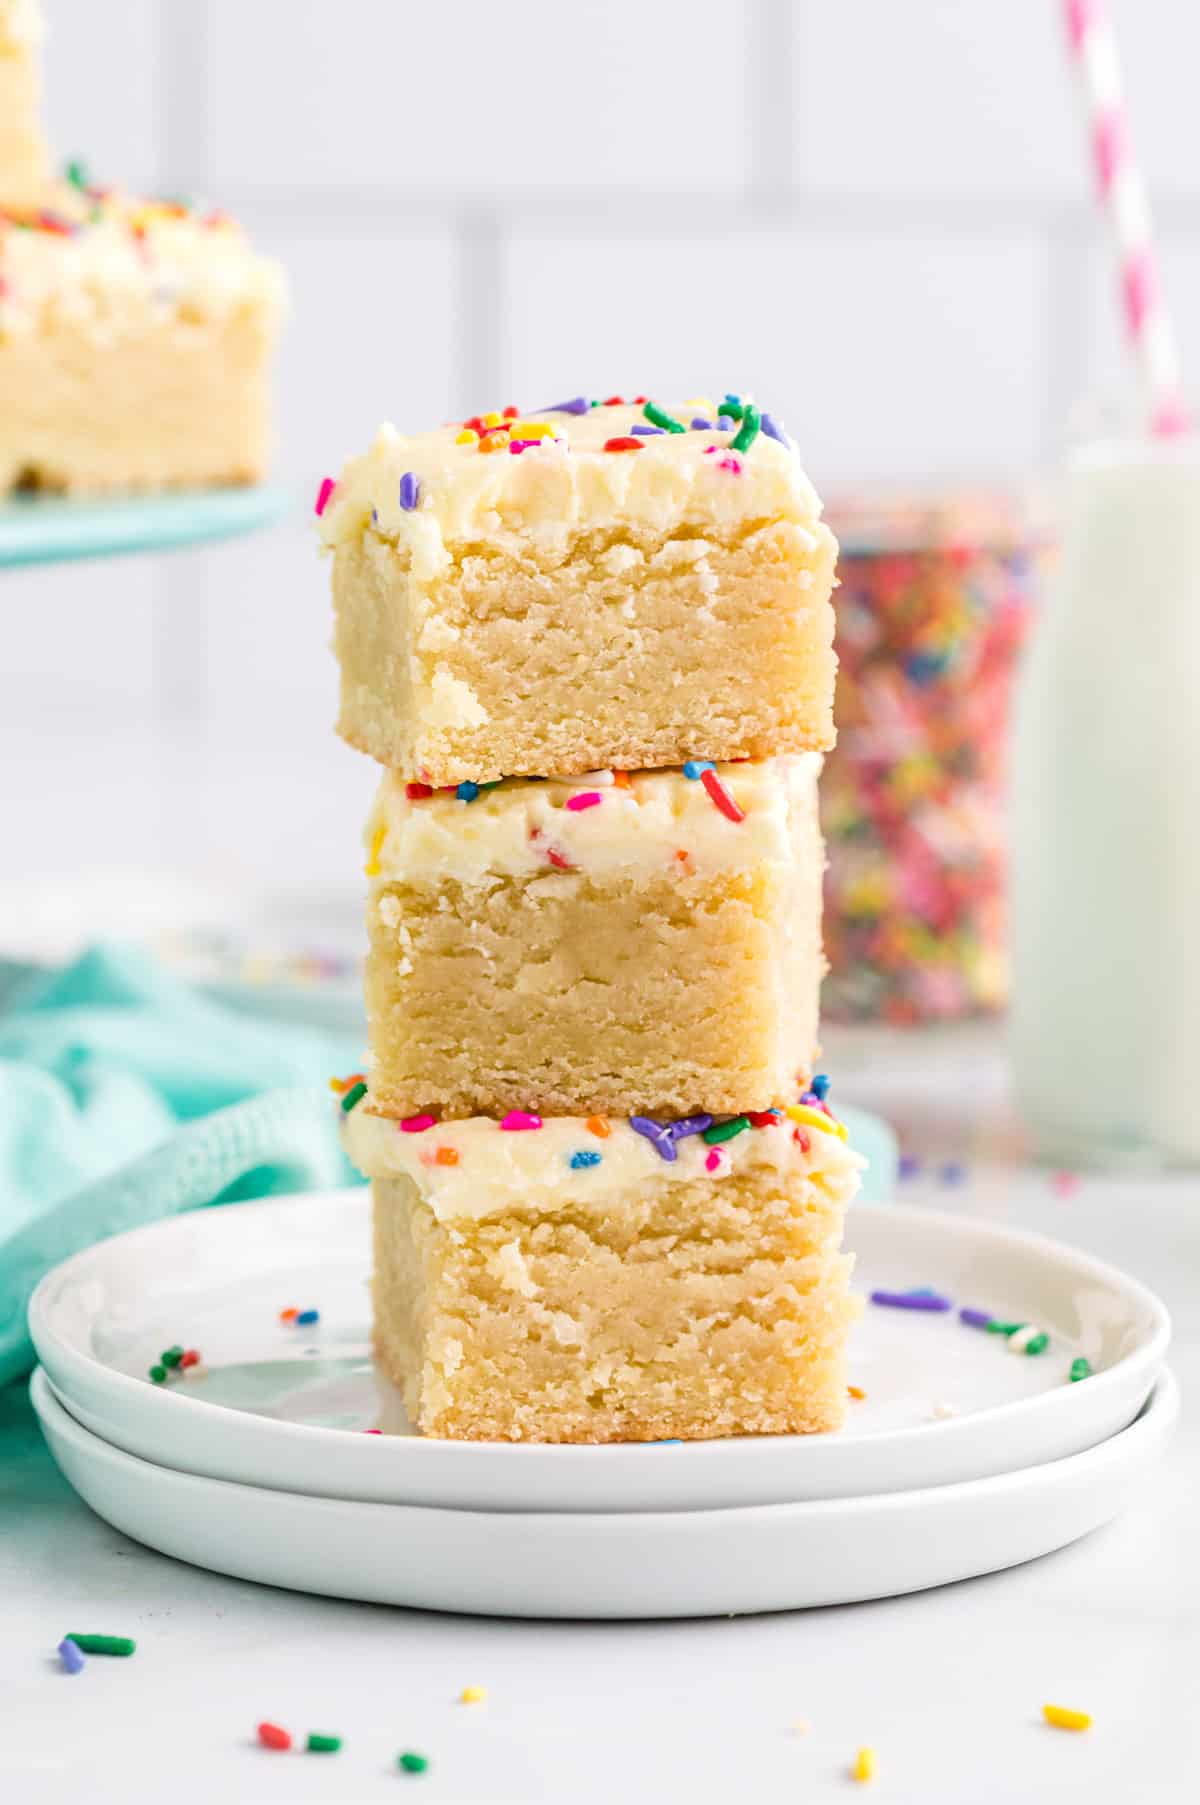 3 thick sugar cookie bars with frosting stacked on a white plate. A jar of rainbow sprinkles can be seen in background.